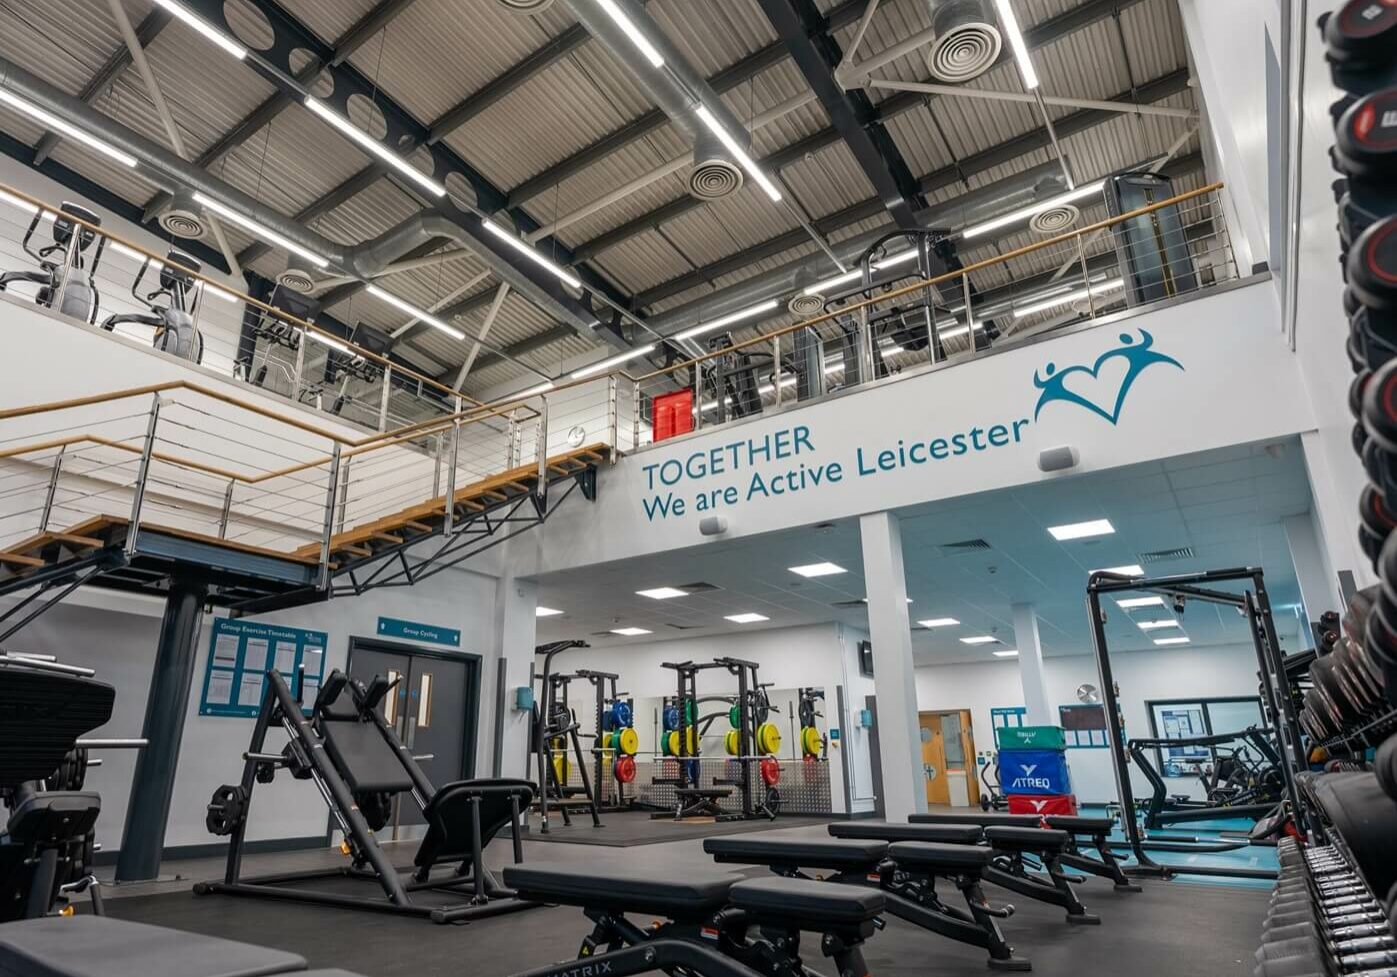 Braunstone Leisure centre refurbishment and fit out